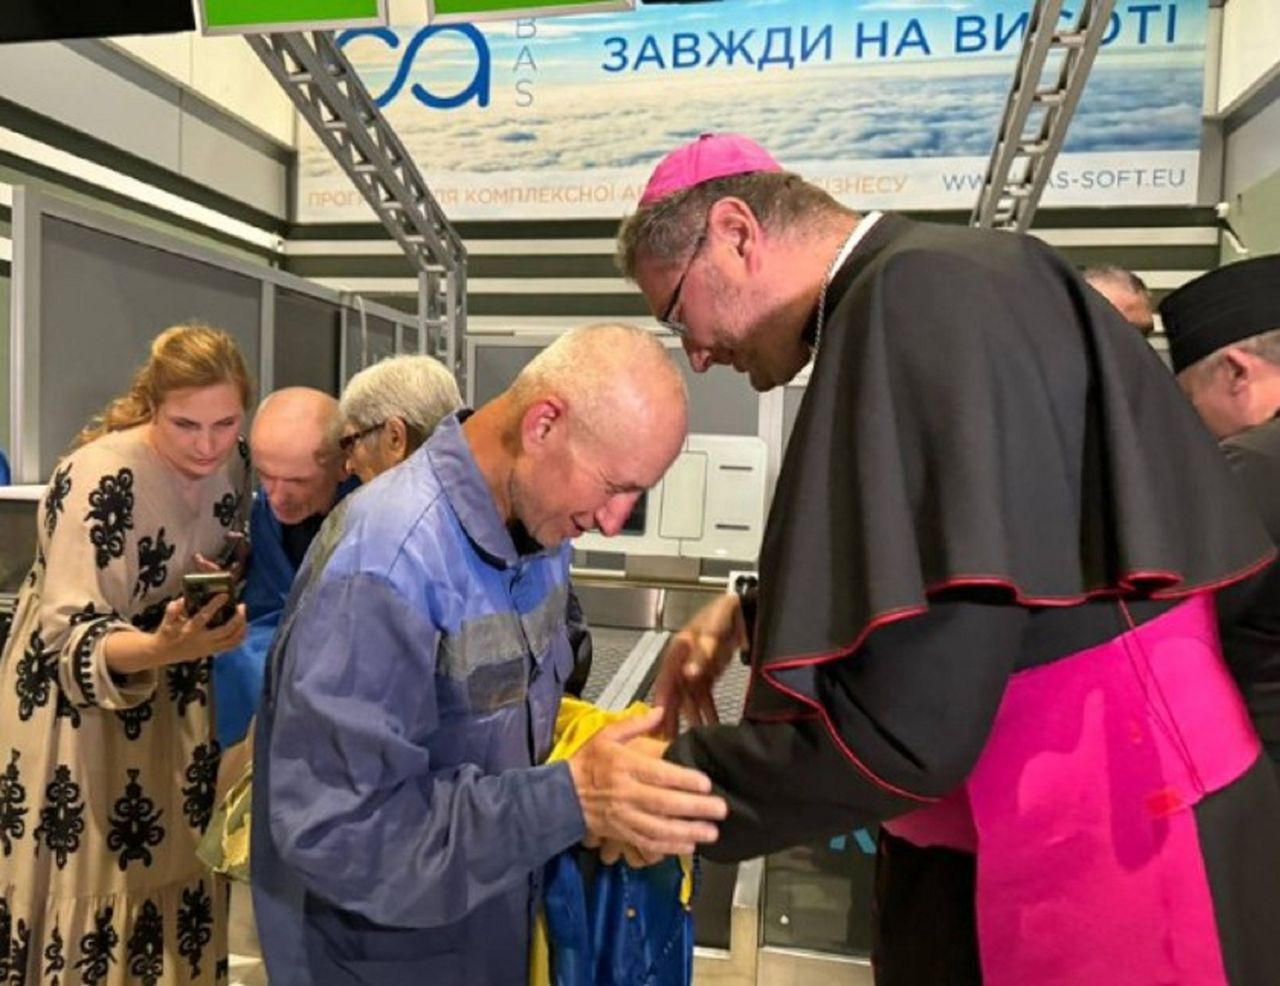 Ukraine secures release of 10 captives with help from Vatican